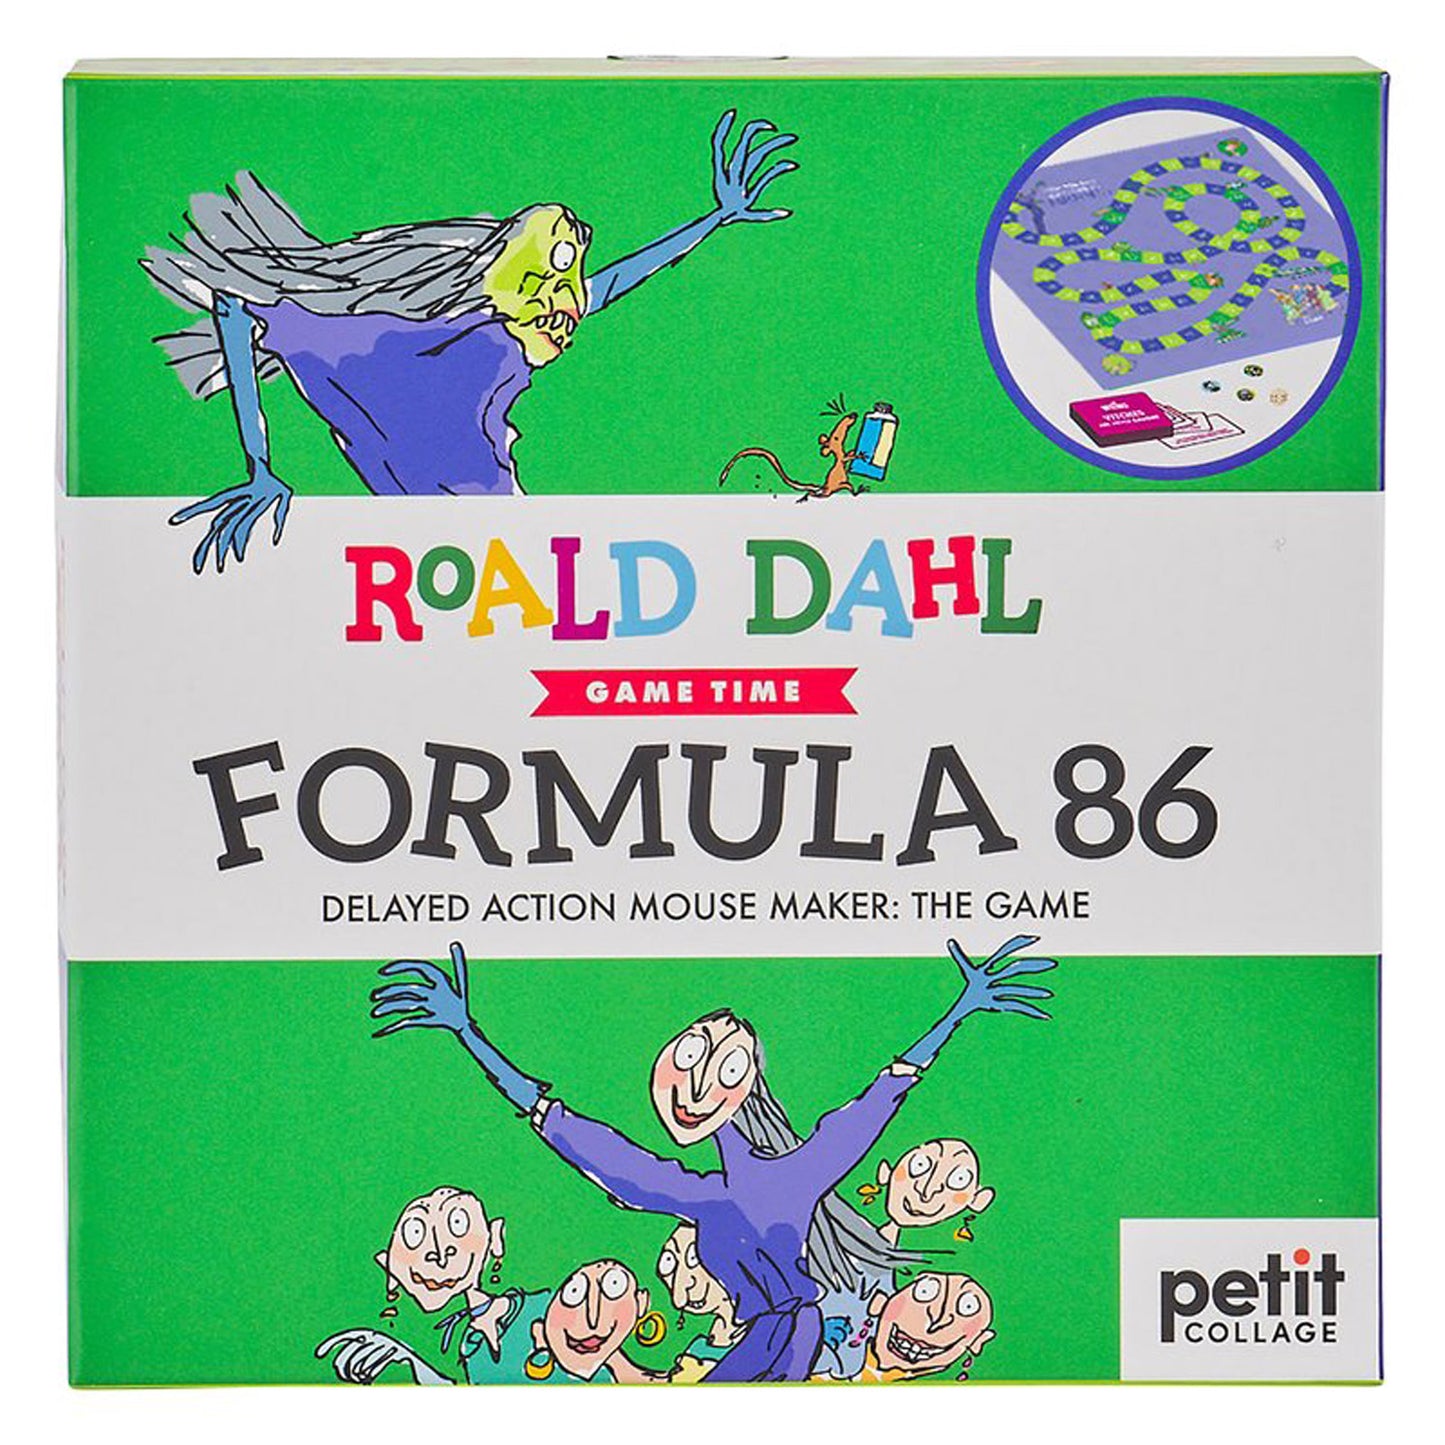 Formula 86 Delayed Action Mouse Maker: The Game, based on Roald Dahl's The Witches and with illustrations by Quentin Blake